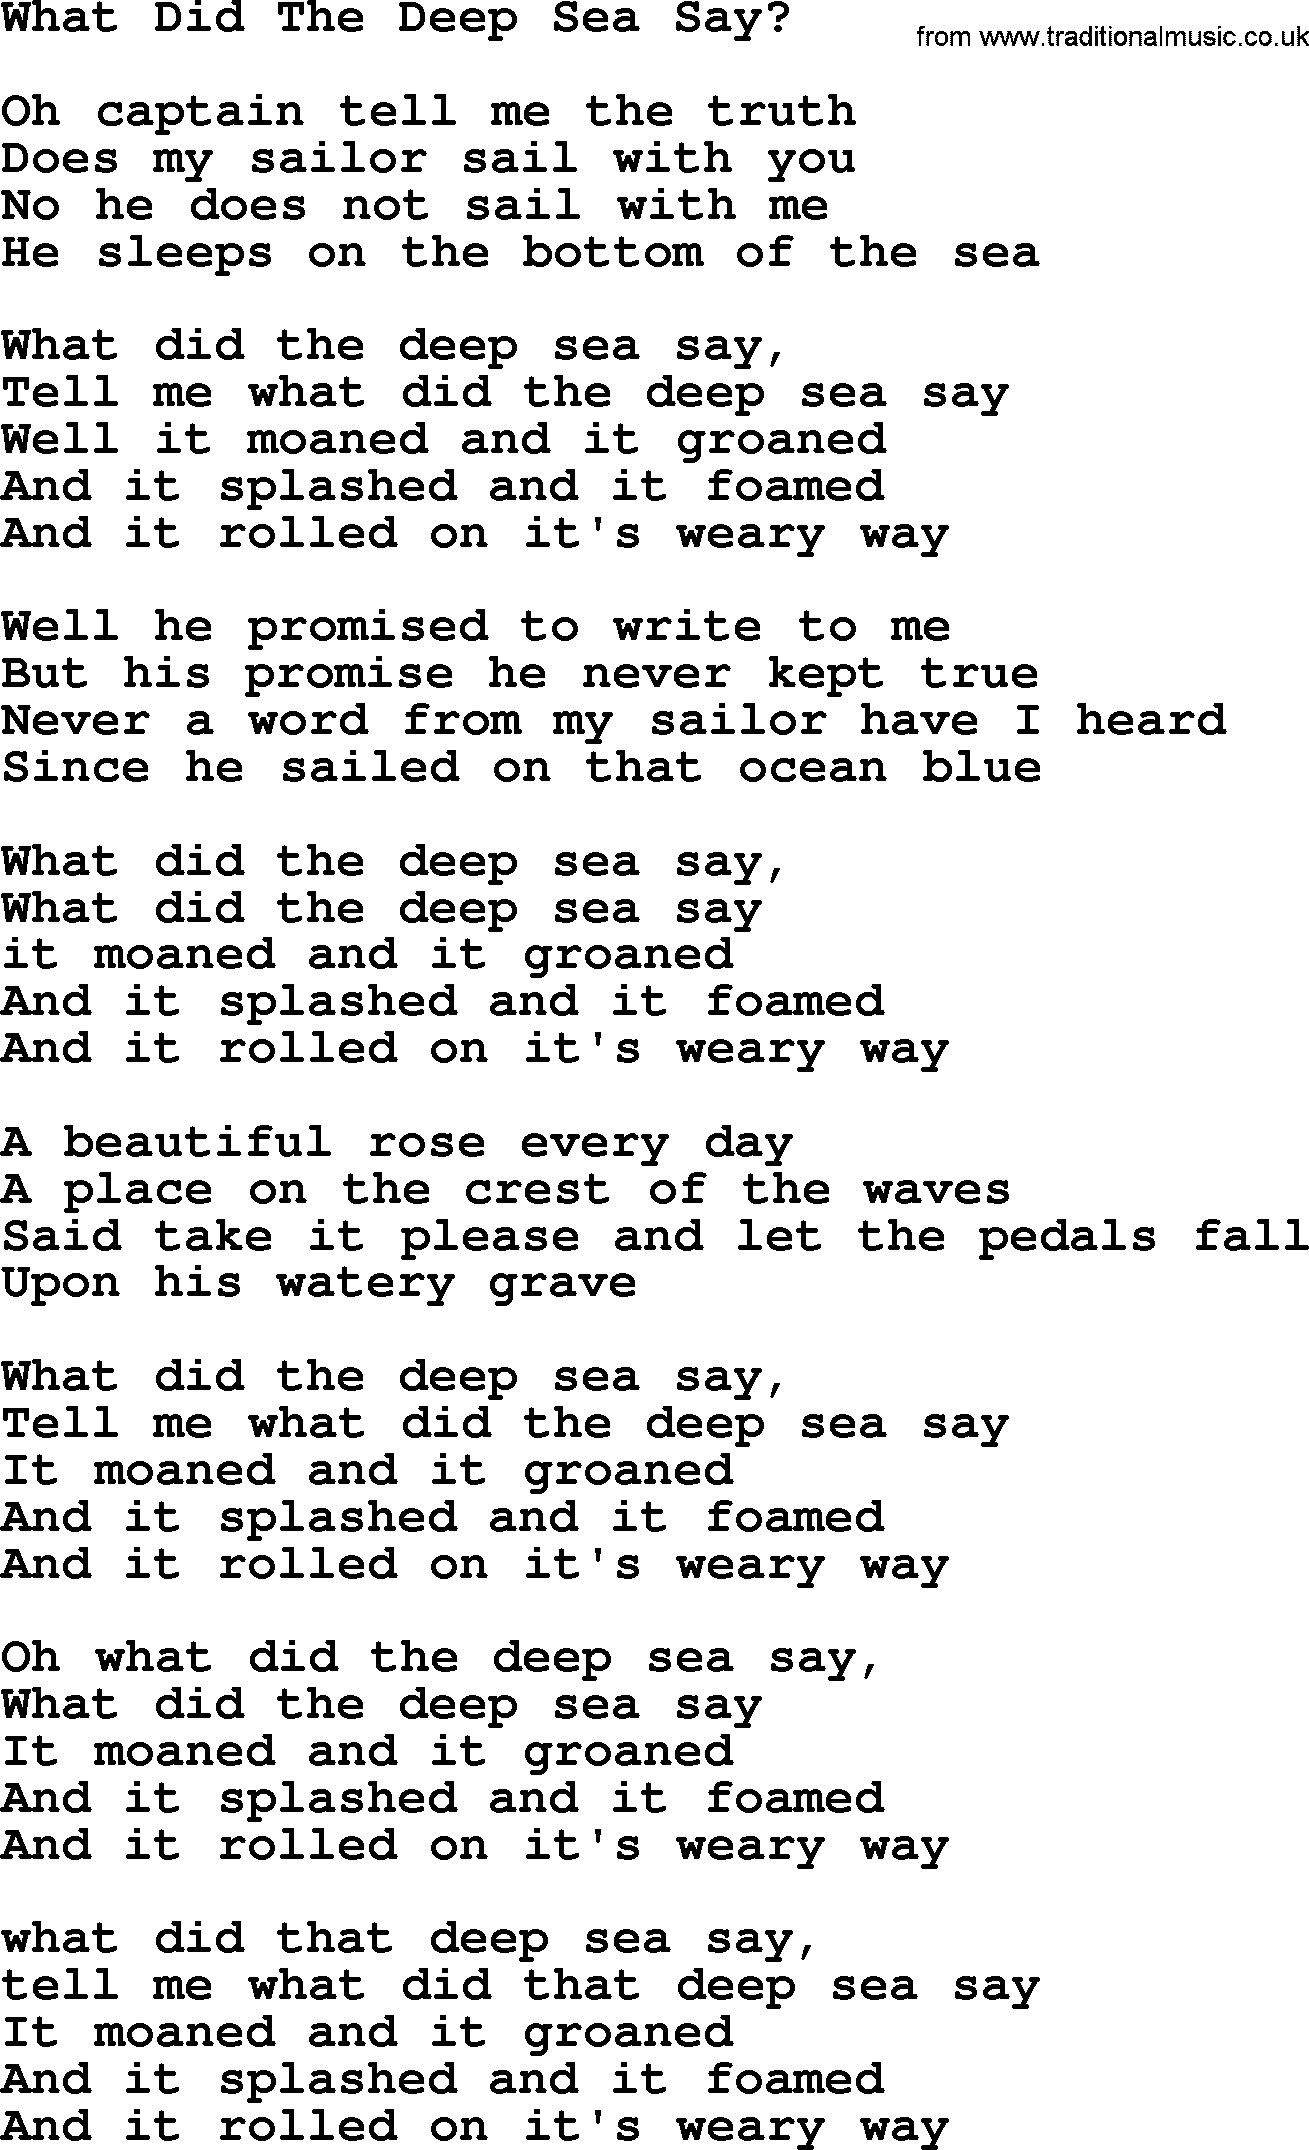 Woody Guthrie song What Did The Deep Sea Say lyrics